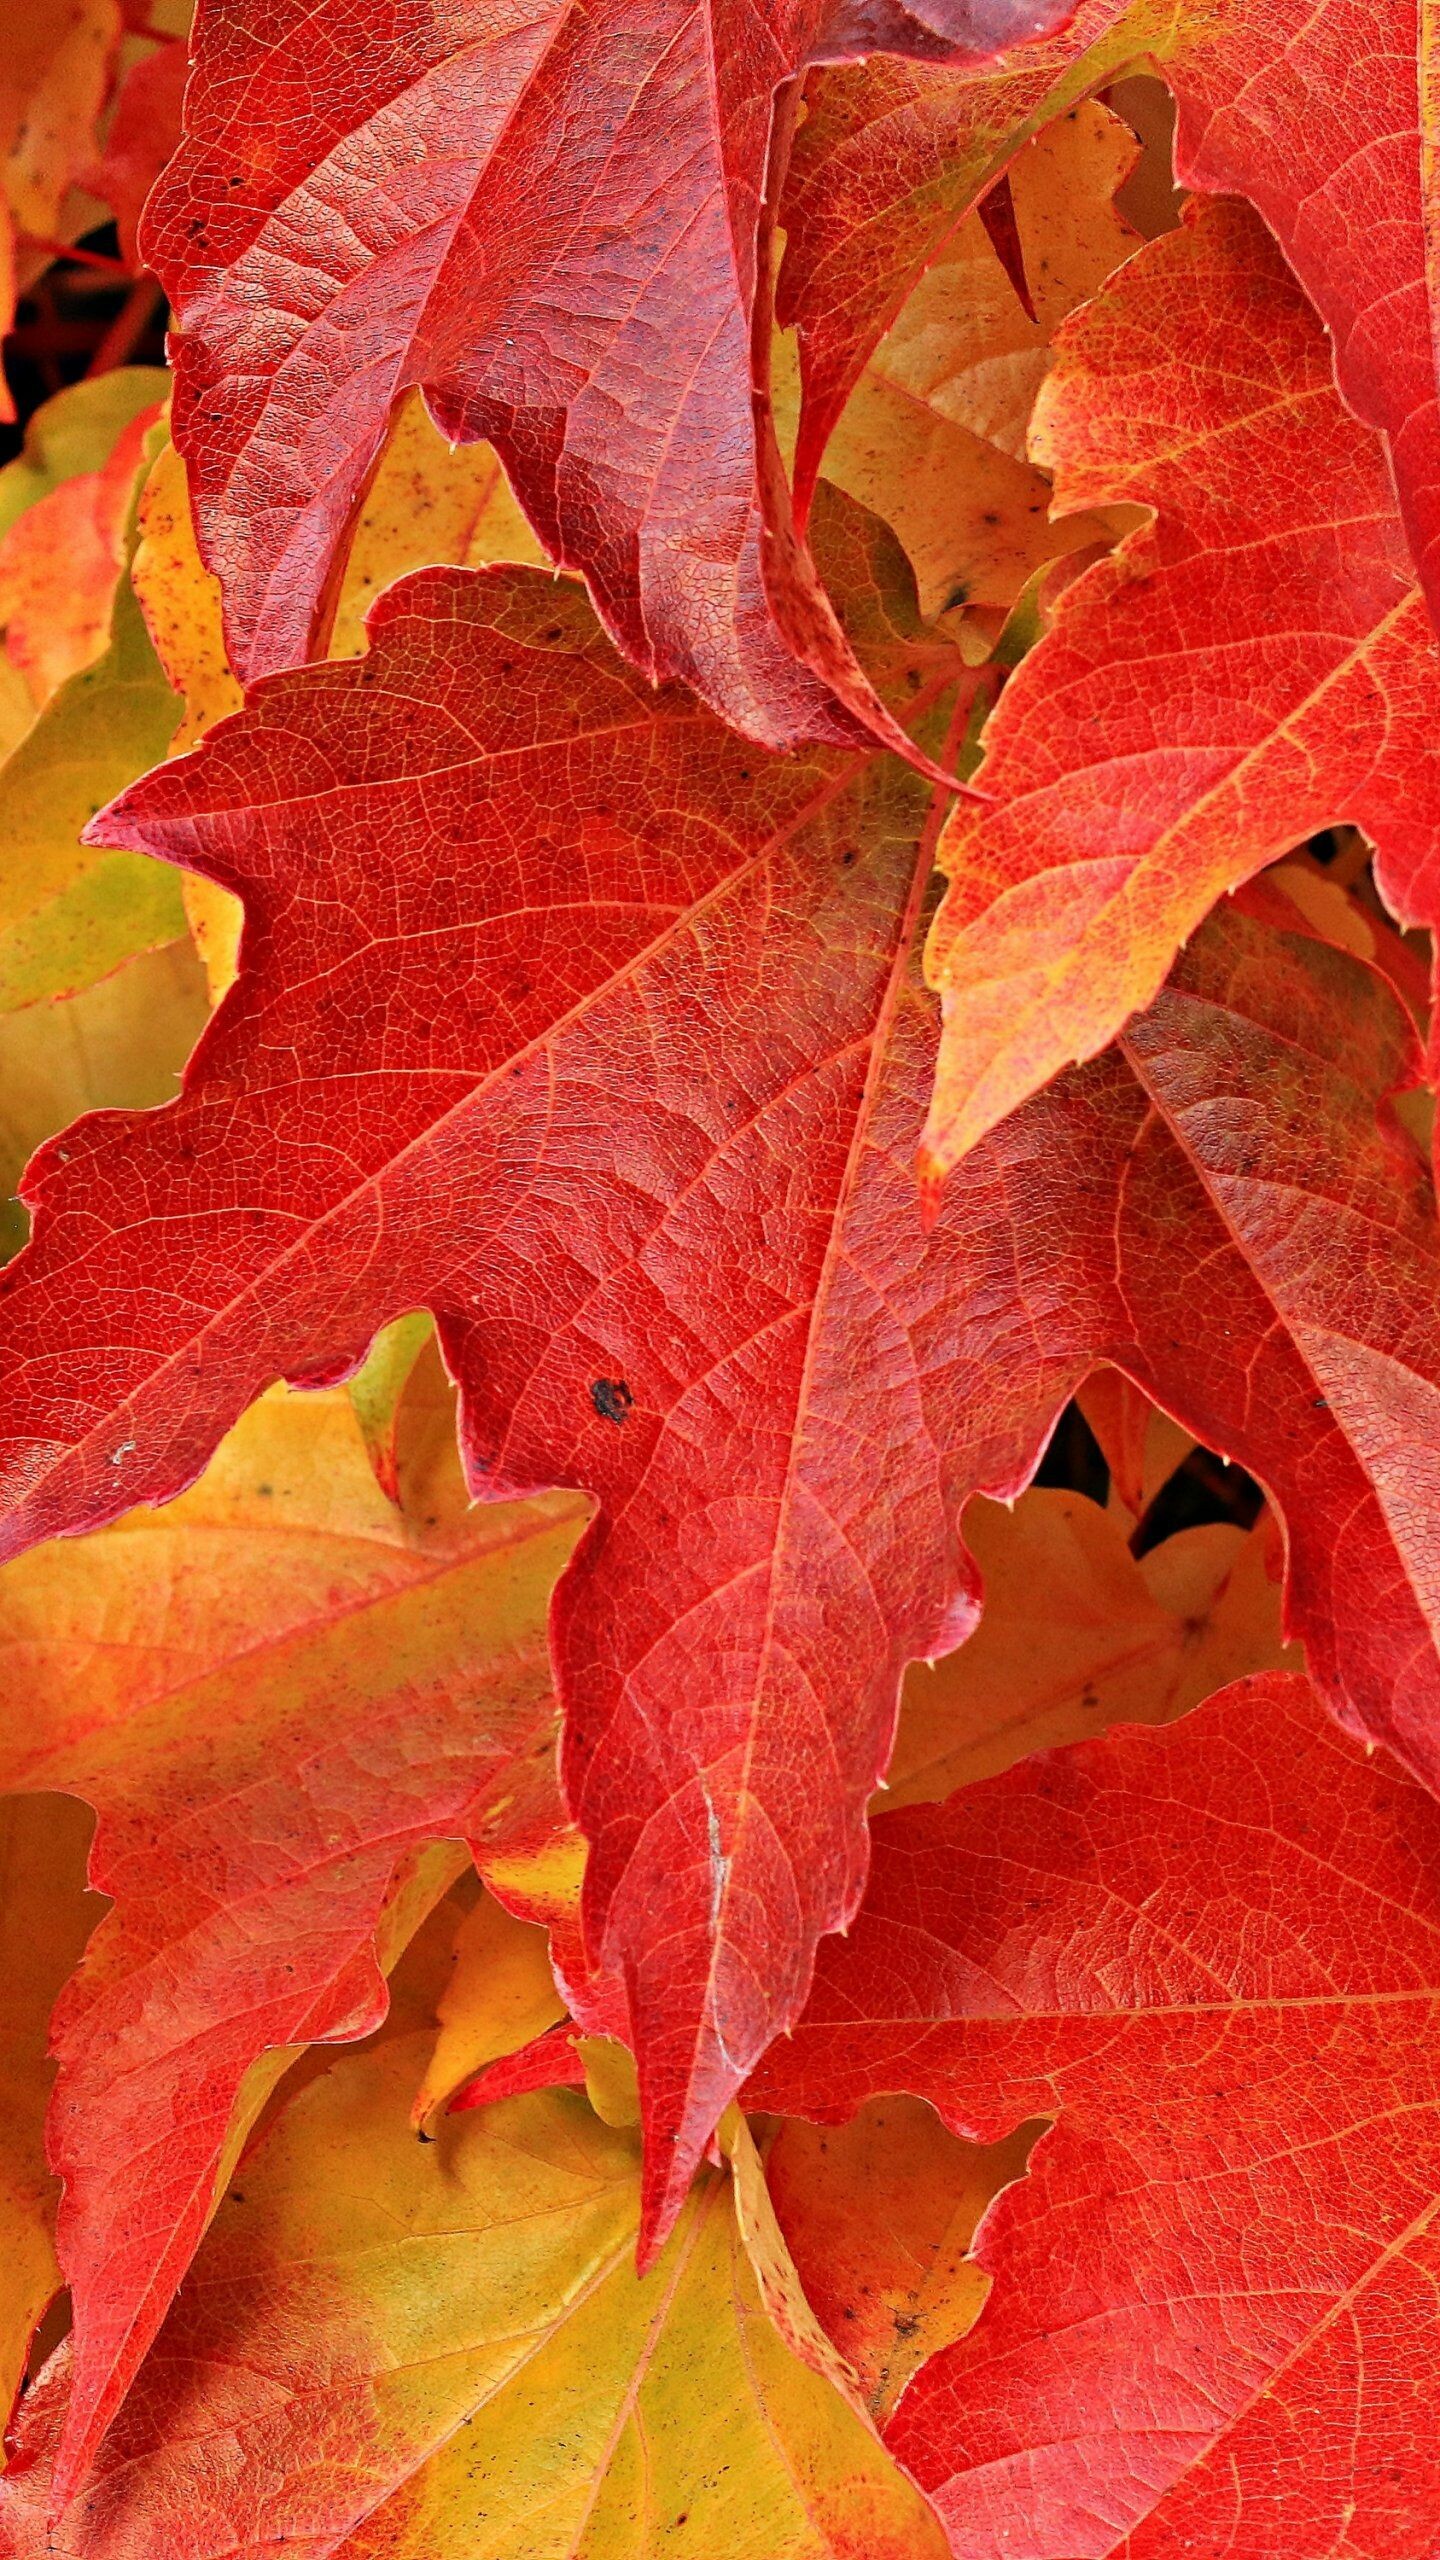 Leaf: Maple, Aromatic oils, poisons, or pheromones produced by glands deter herbivores. 1440x2560 HD Wallpaper.